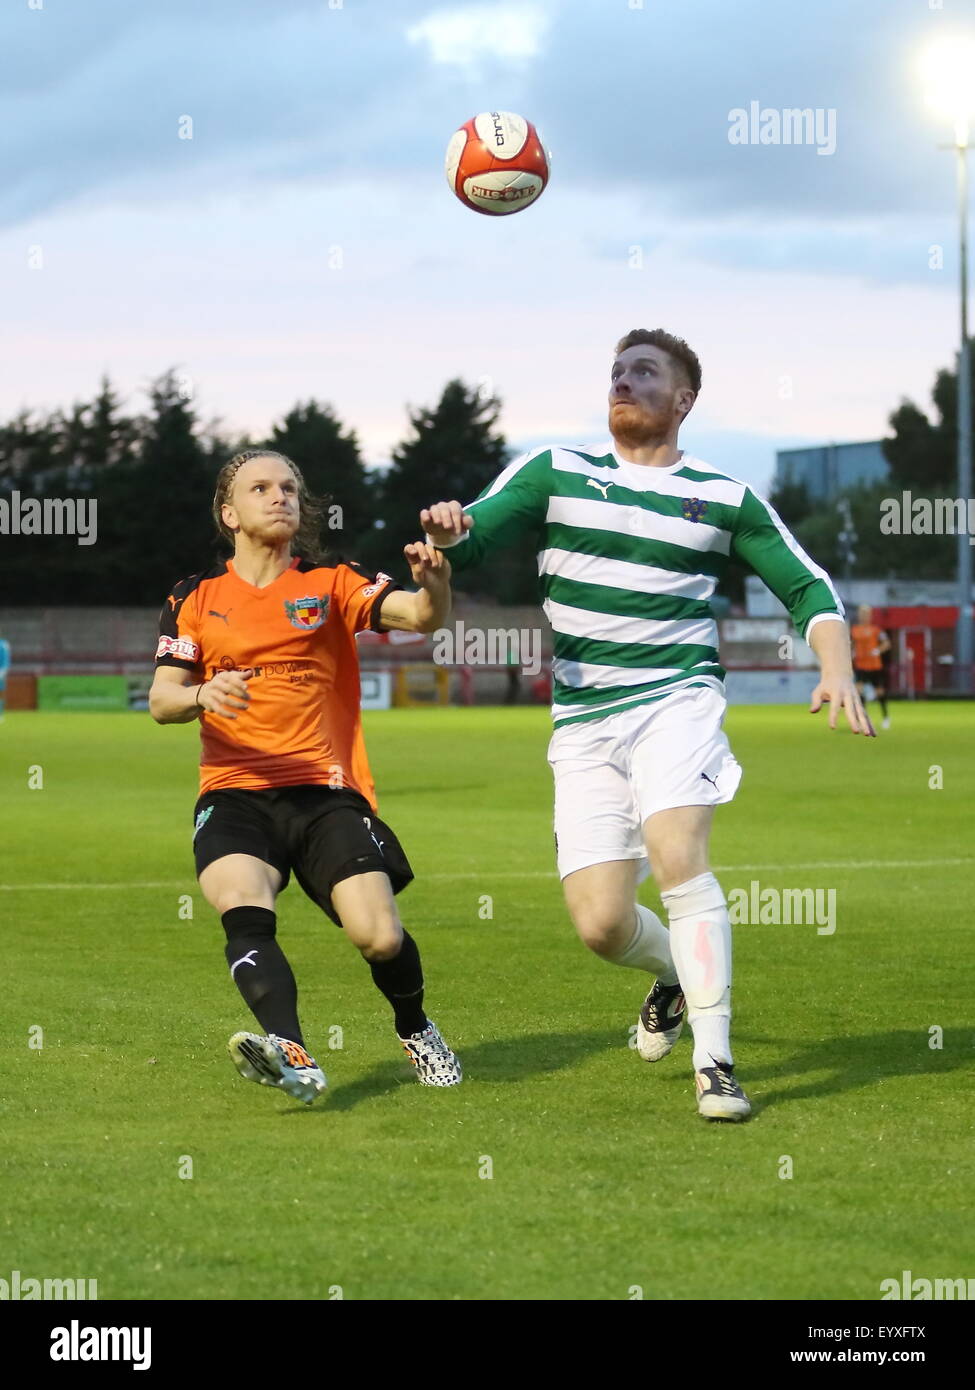 Northwich, Cheshire, UK. 4th August, 2015. Northwich Victoria beat Nantwich Town 2-0 in a pre season friendly held at Witton Albion's Wincham Park in Northwich. Nantwich Town's Matty Kosylo challenges Northwich's Anthony Smart. Credit:  Simon Newbury/Alamy Live News Stock Photo